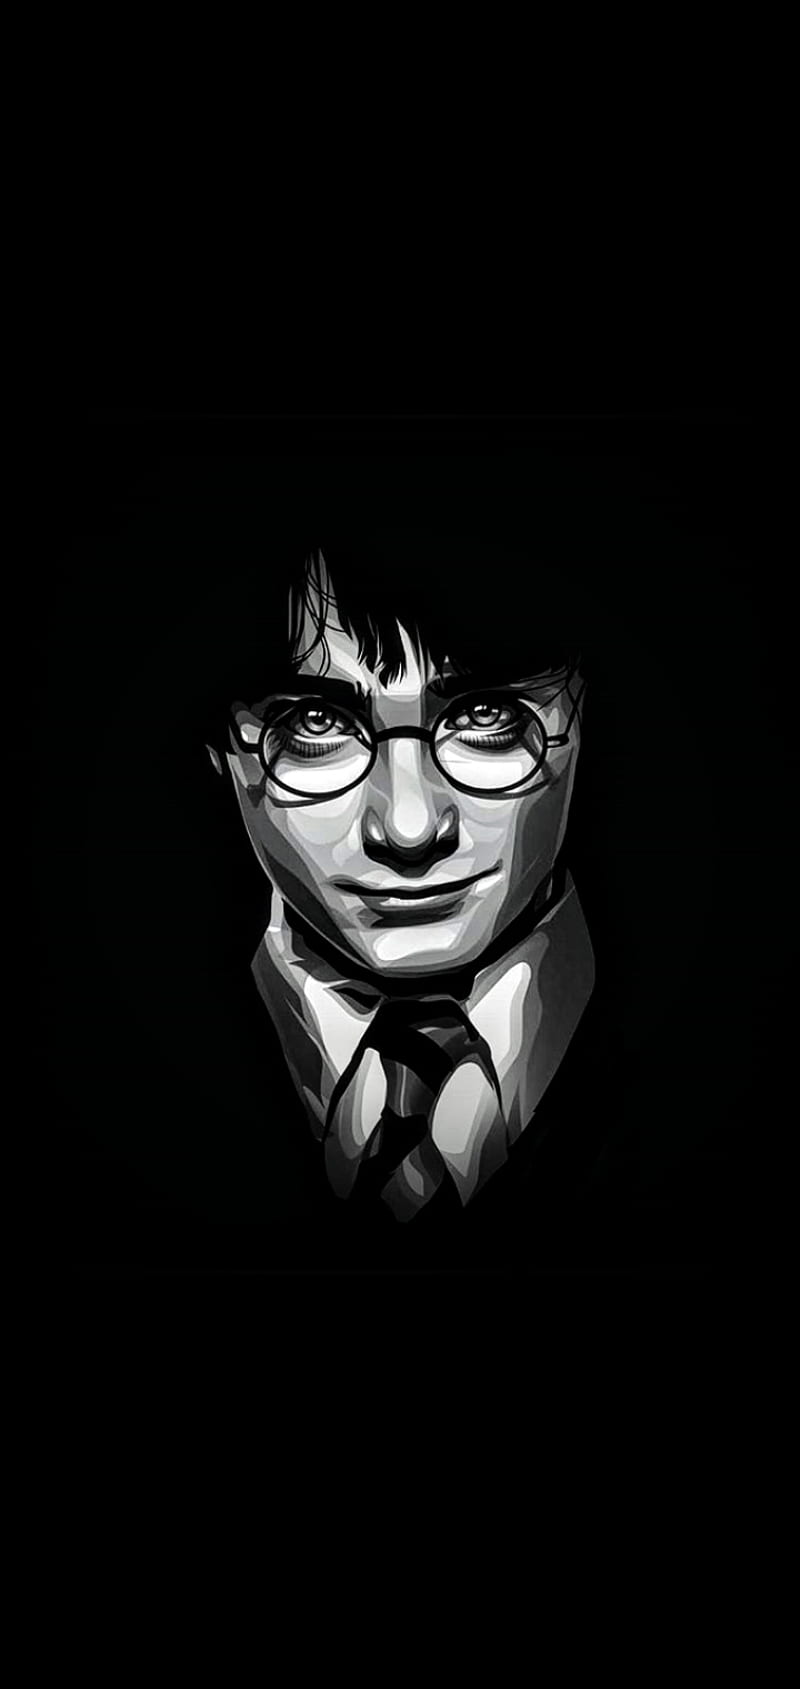 79 Harry Potter Screensavers and Wallpapers